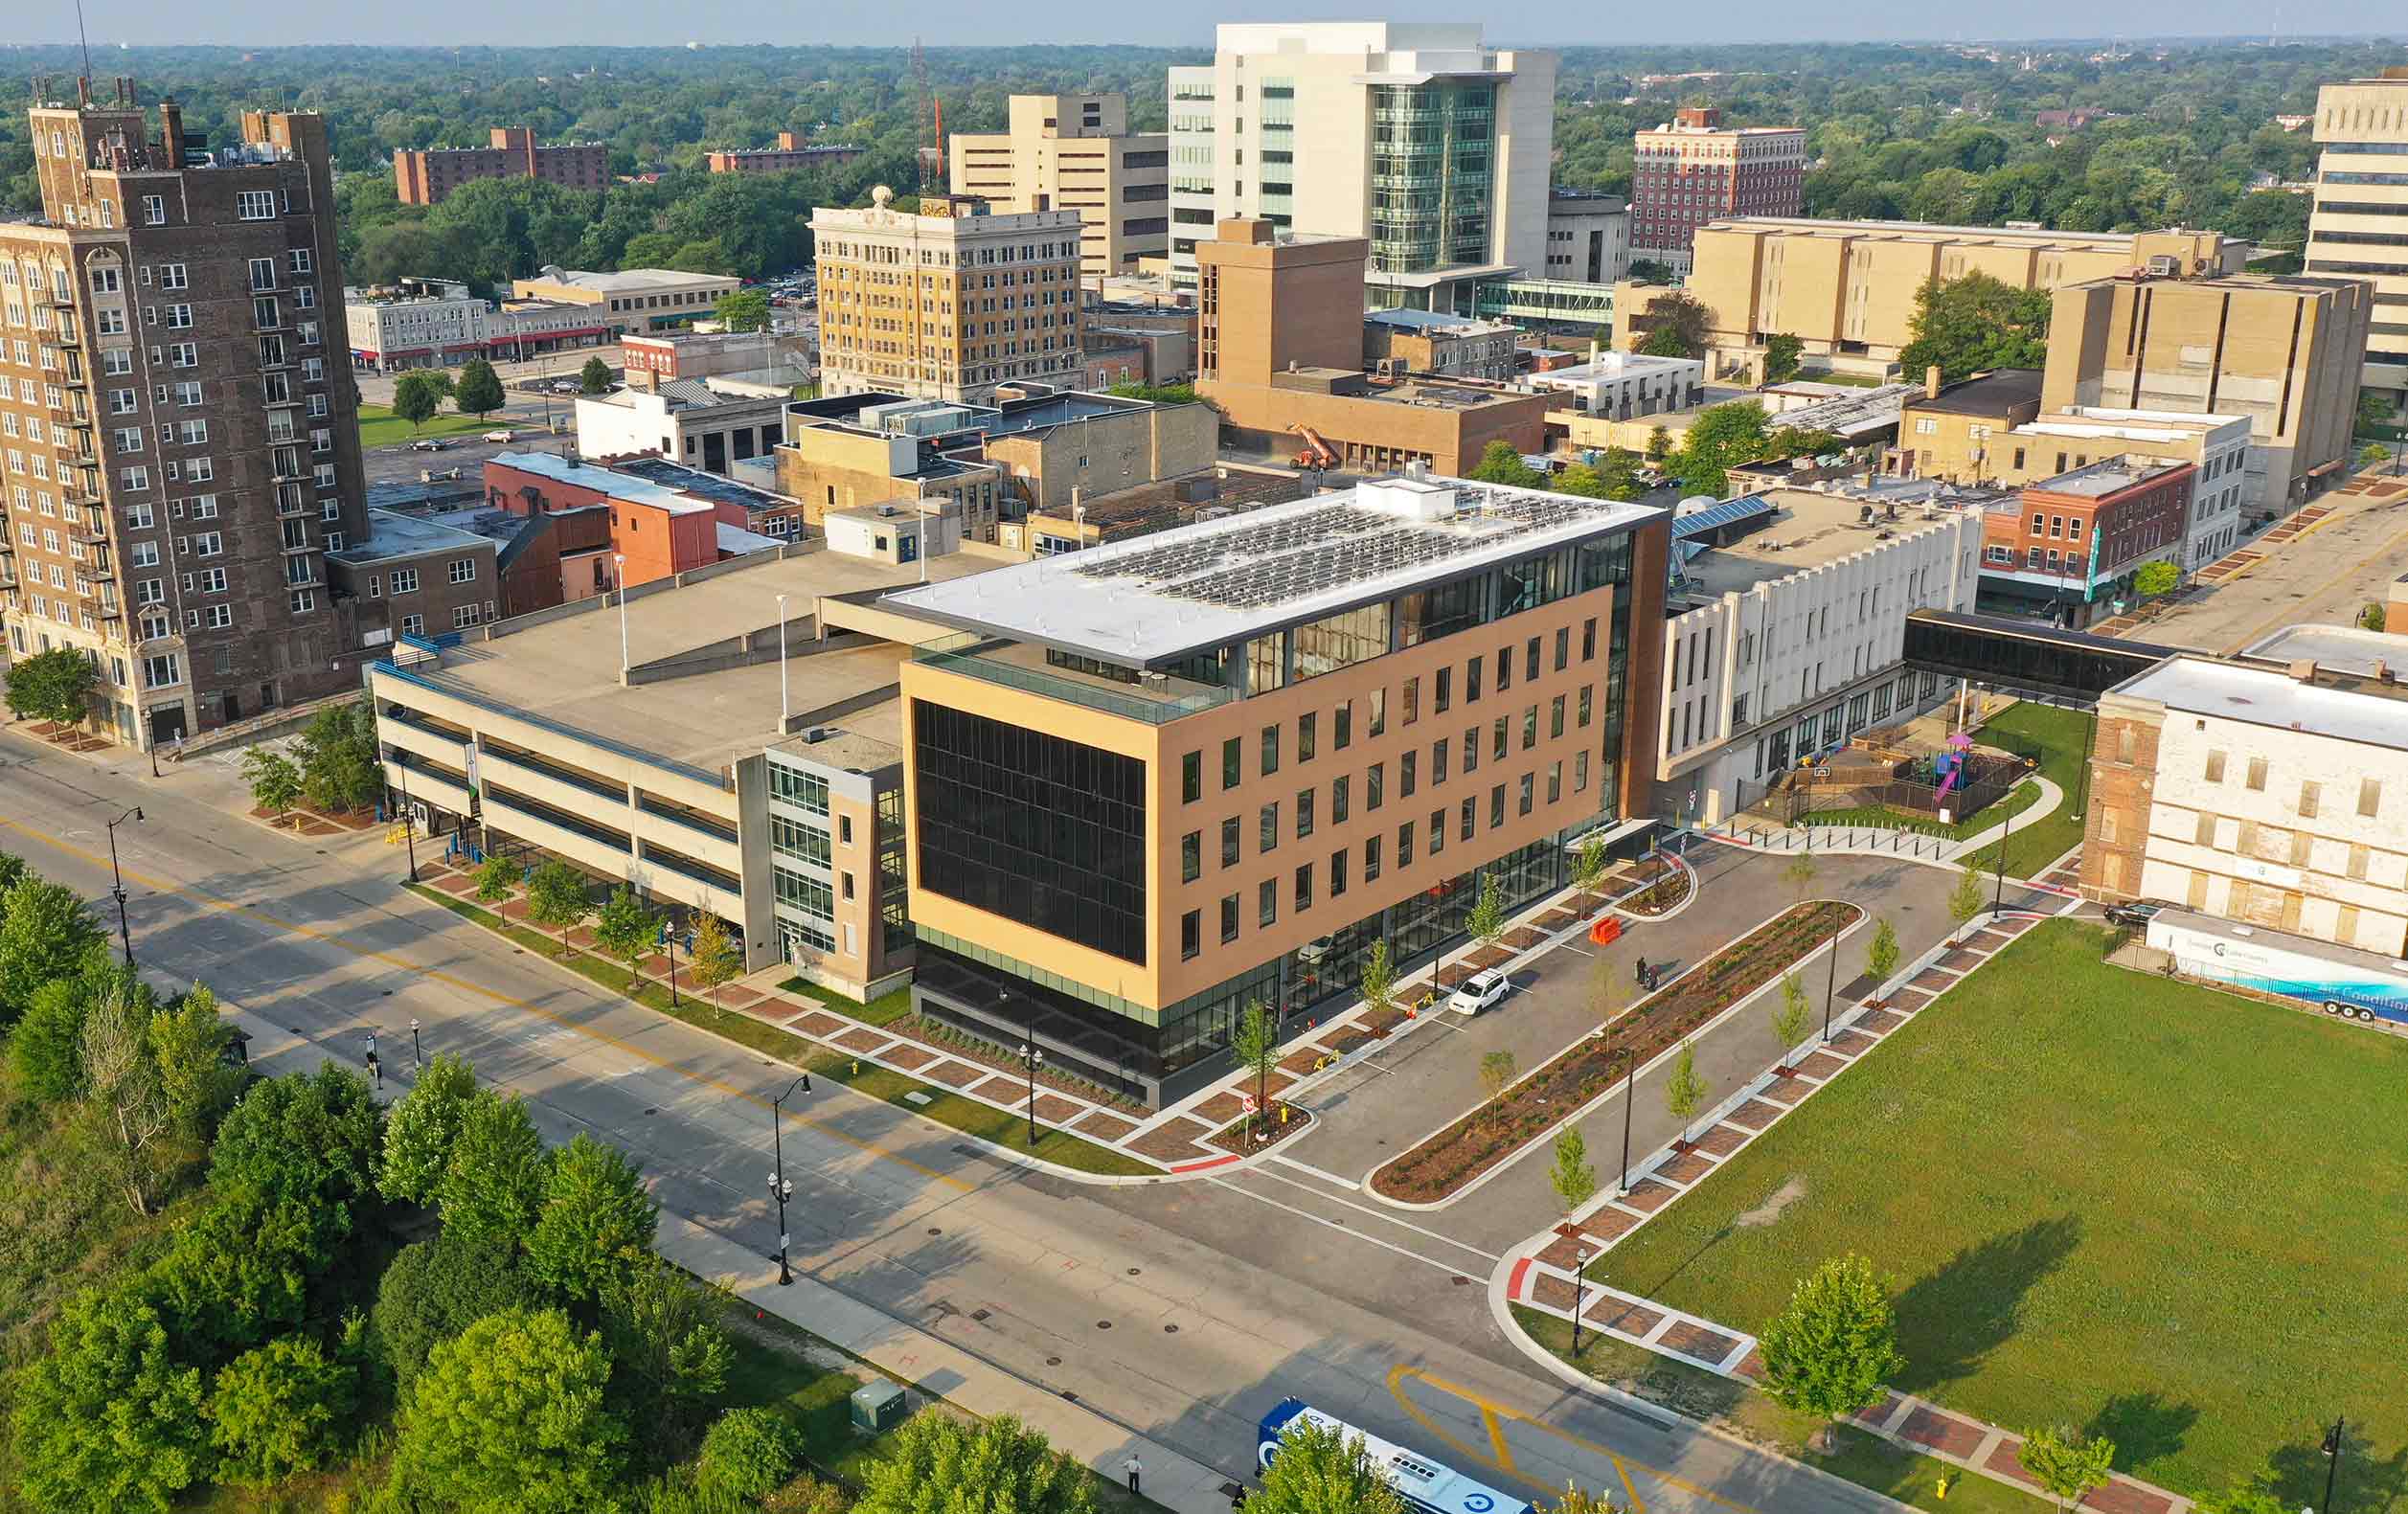 Aerial view of College of Lake County Lakeshore Campus Student Center with downtown Waukegan, Illinois in background